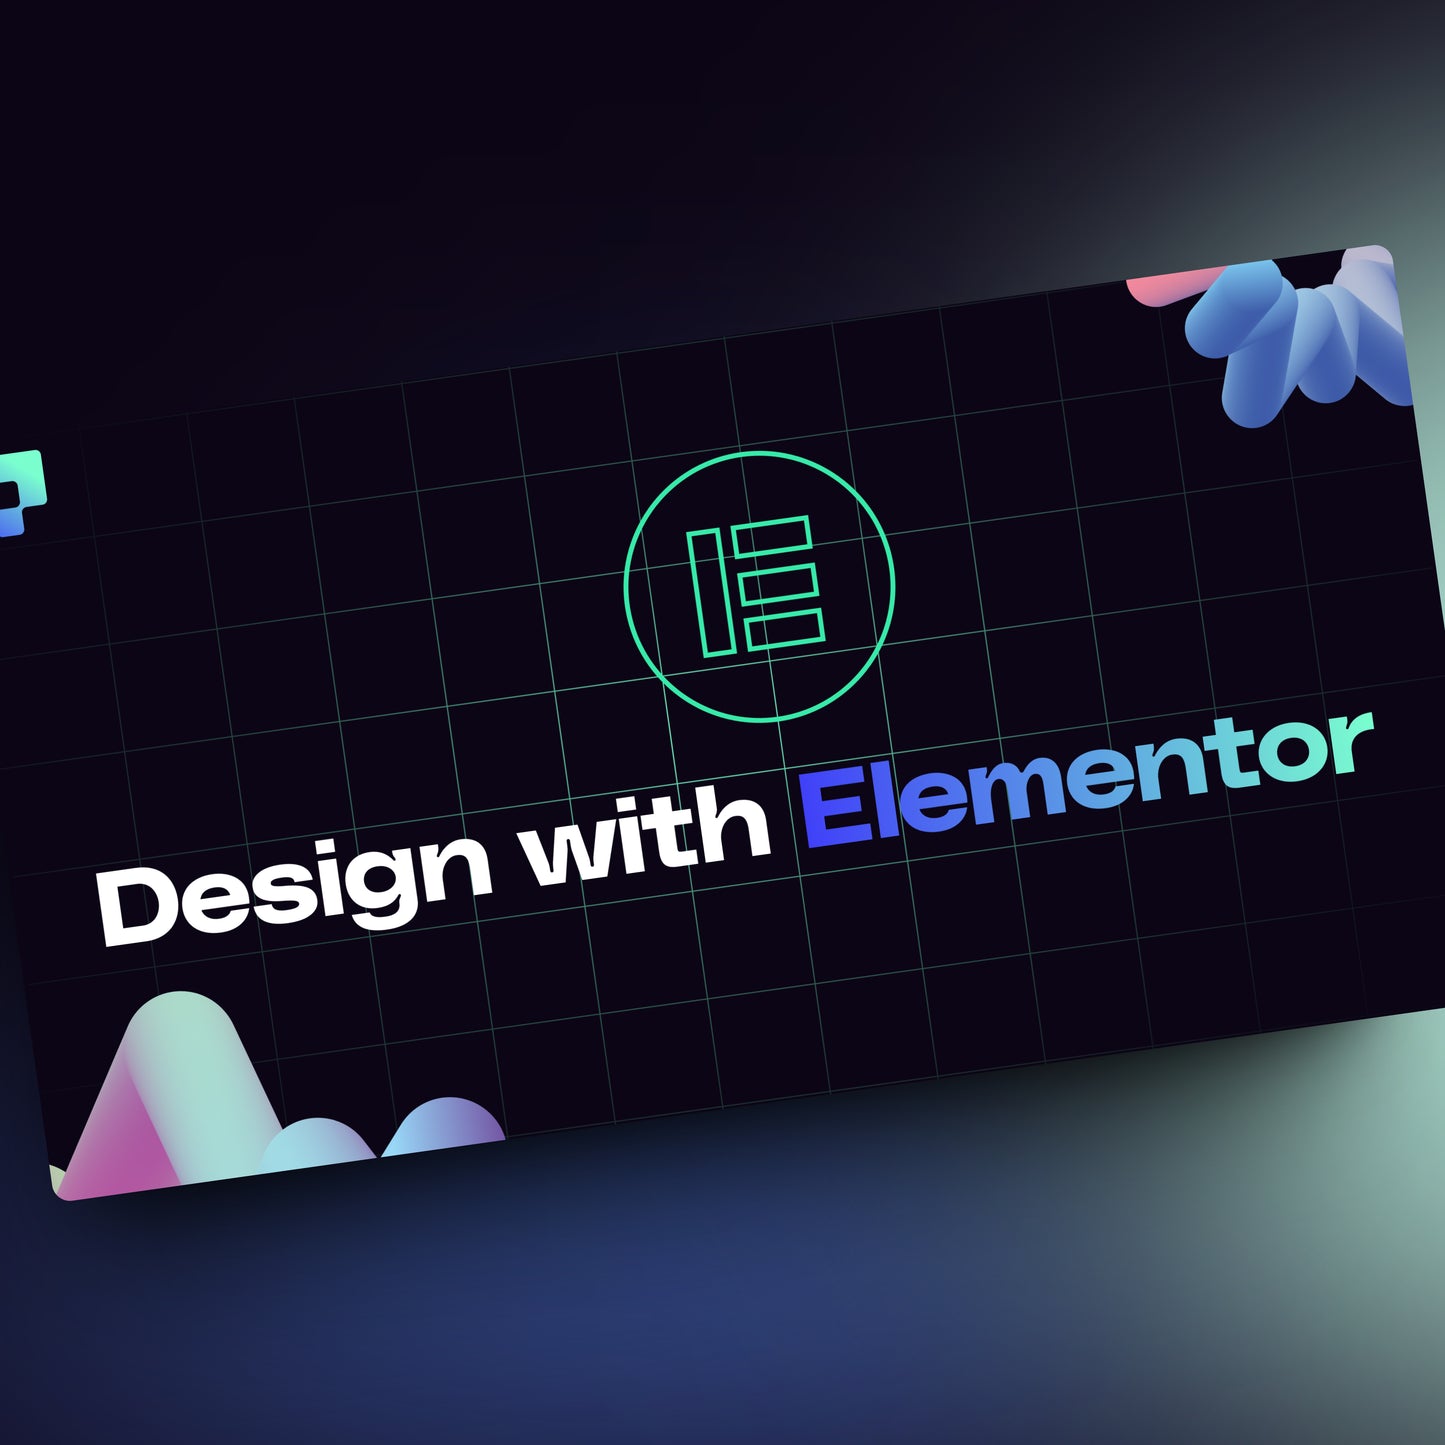 The Design With Elementor Course